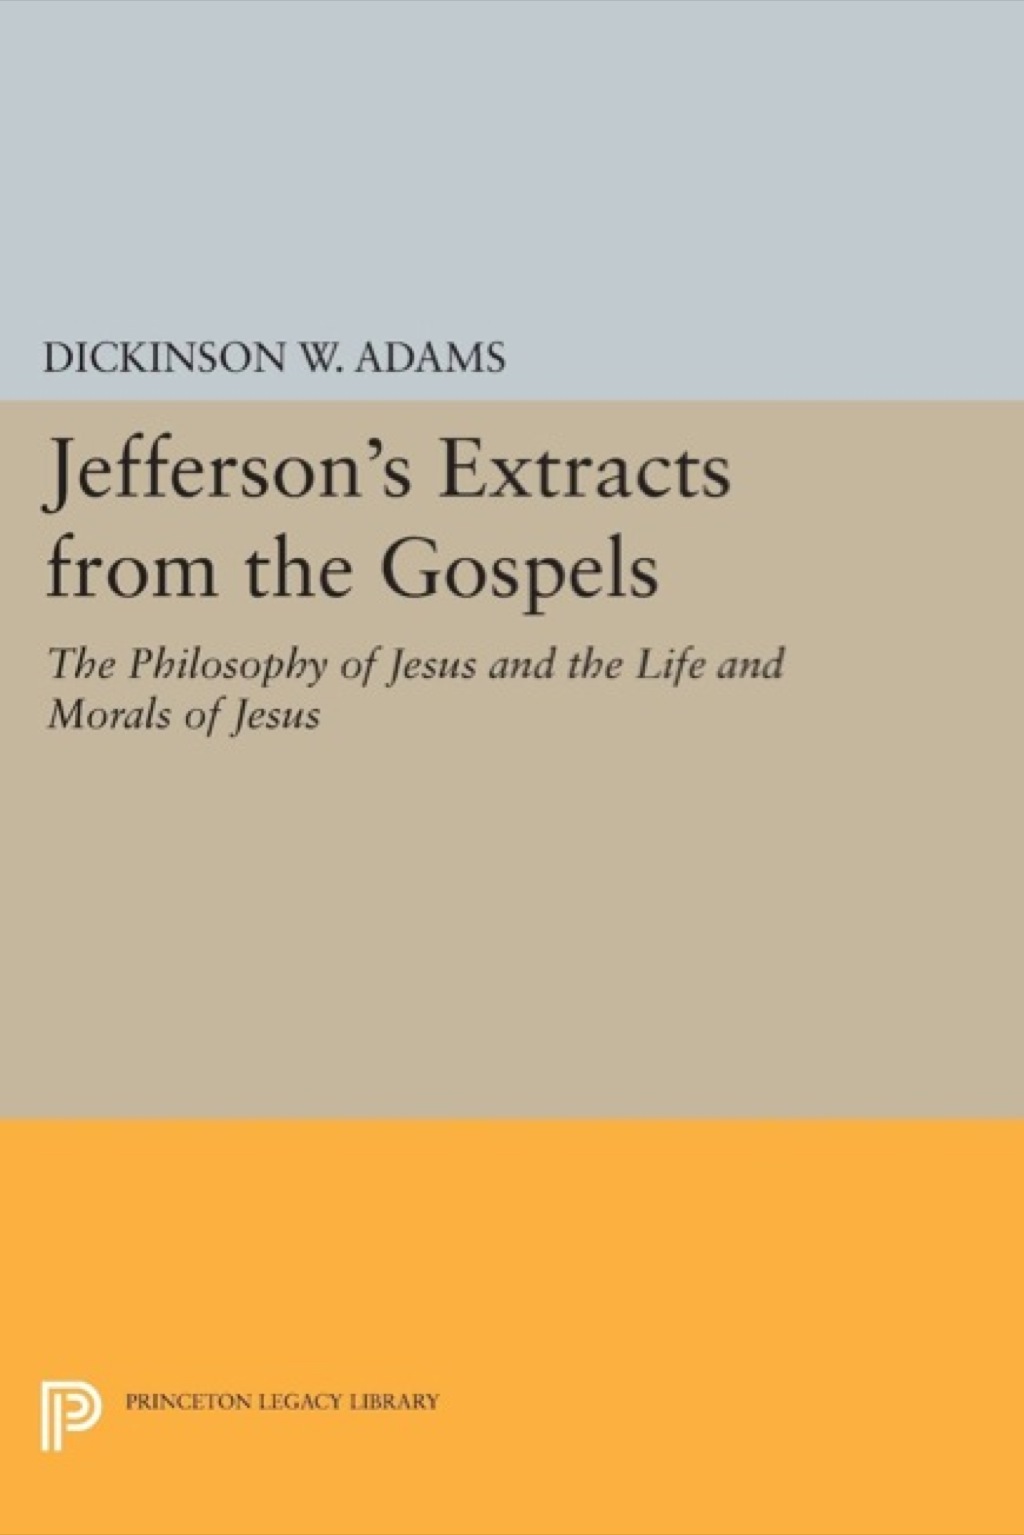 Jefferson's Extracts from the Gospels (eBook) - Dickinson W. Adams,